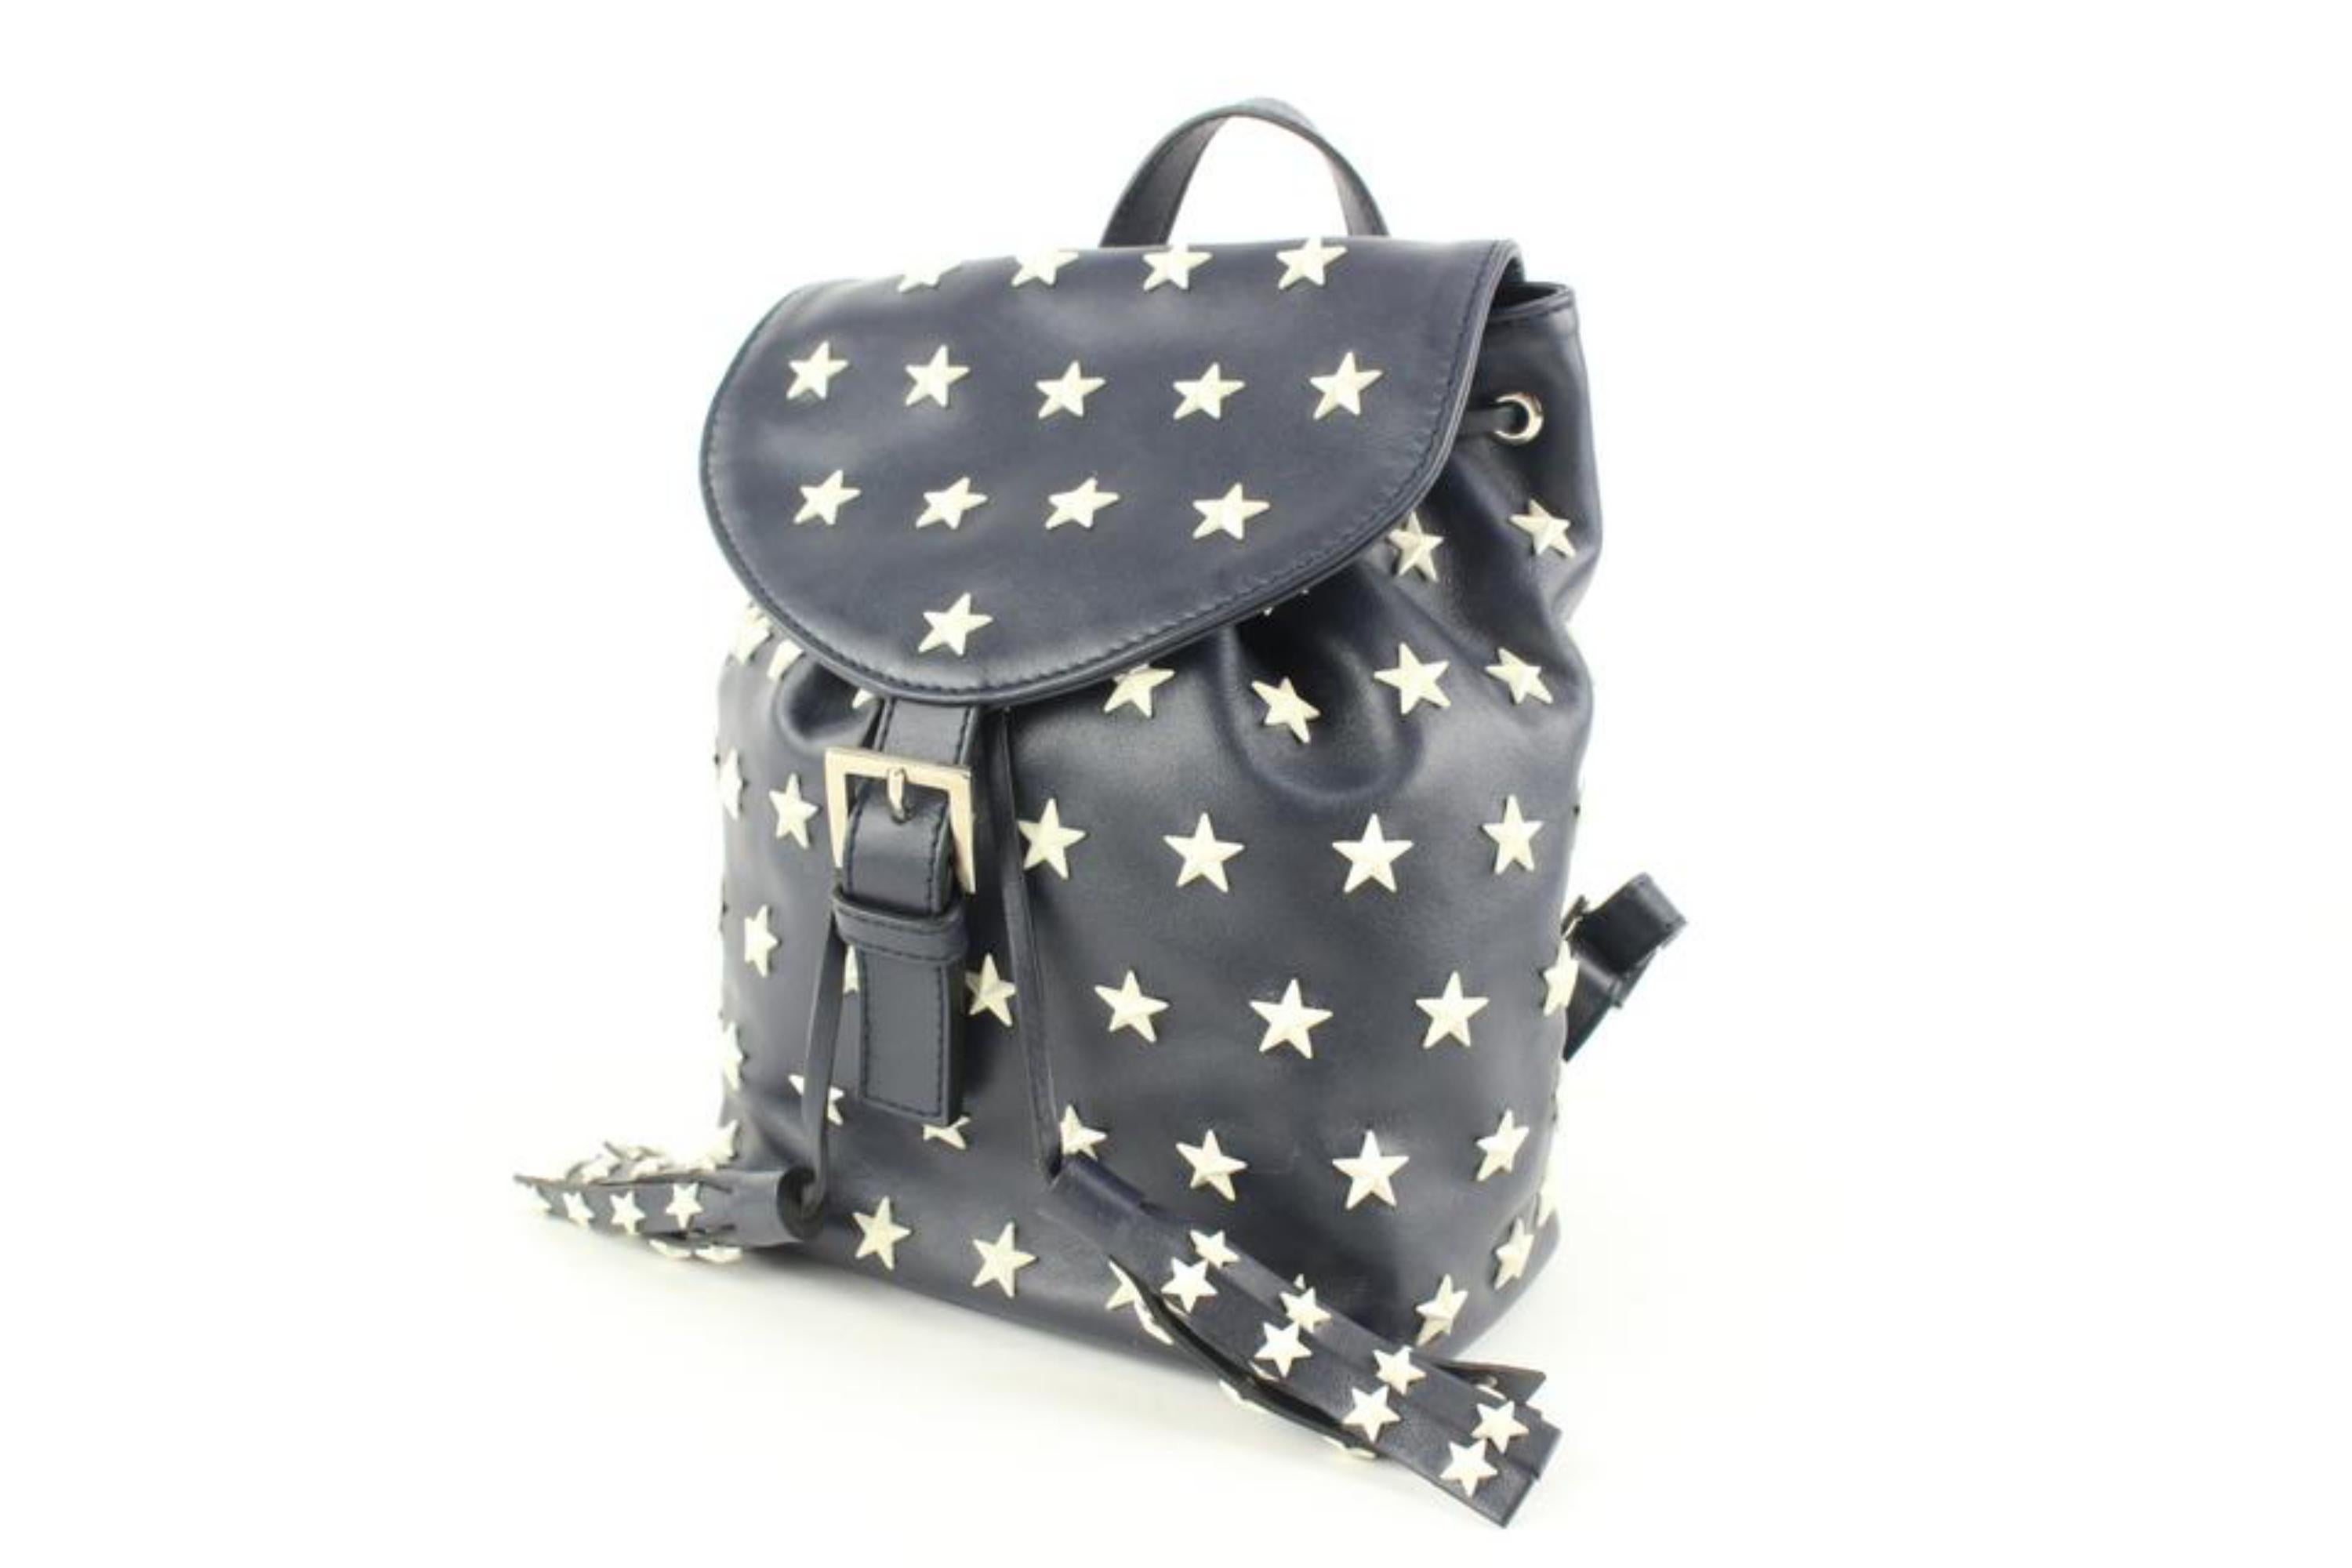 Red Valentino Navy Leather Star Mini Backpack 113re49
Made In: Italy
Measurements: Length:  10